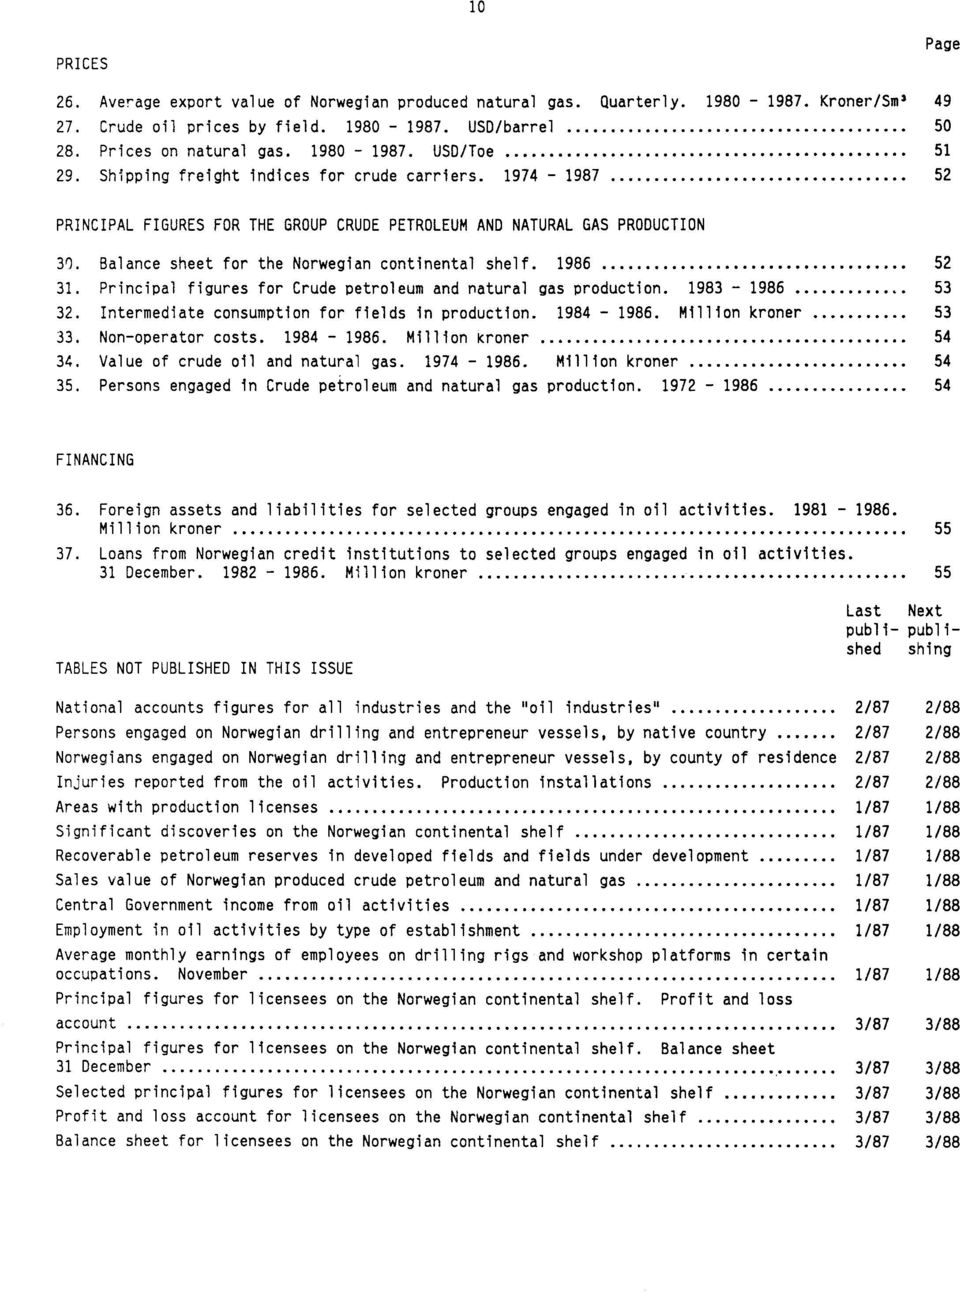 Balance sheet for the Norwegian continental shelf. 1986 52 31. Principal figures for Crude petroleum and natural gas production. 1983-1986 53 32. Intermediate consumption for fields in production.